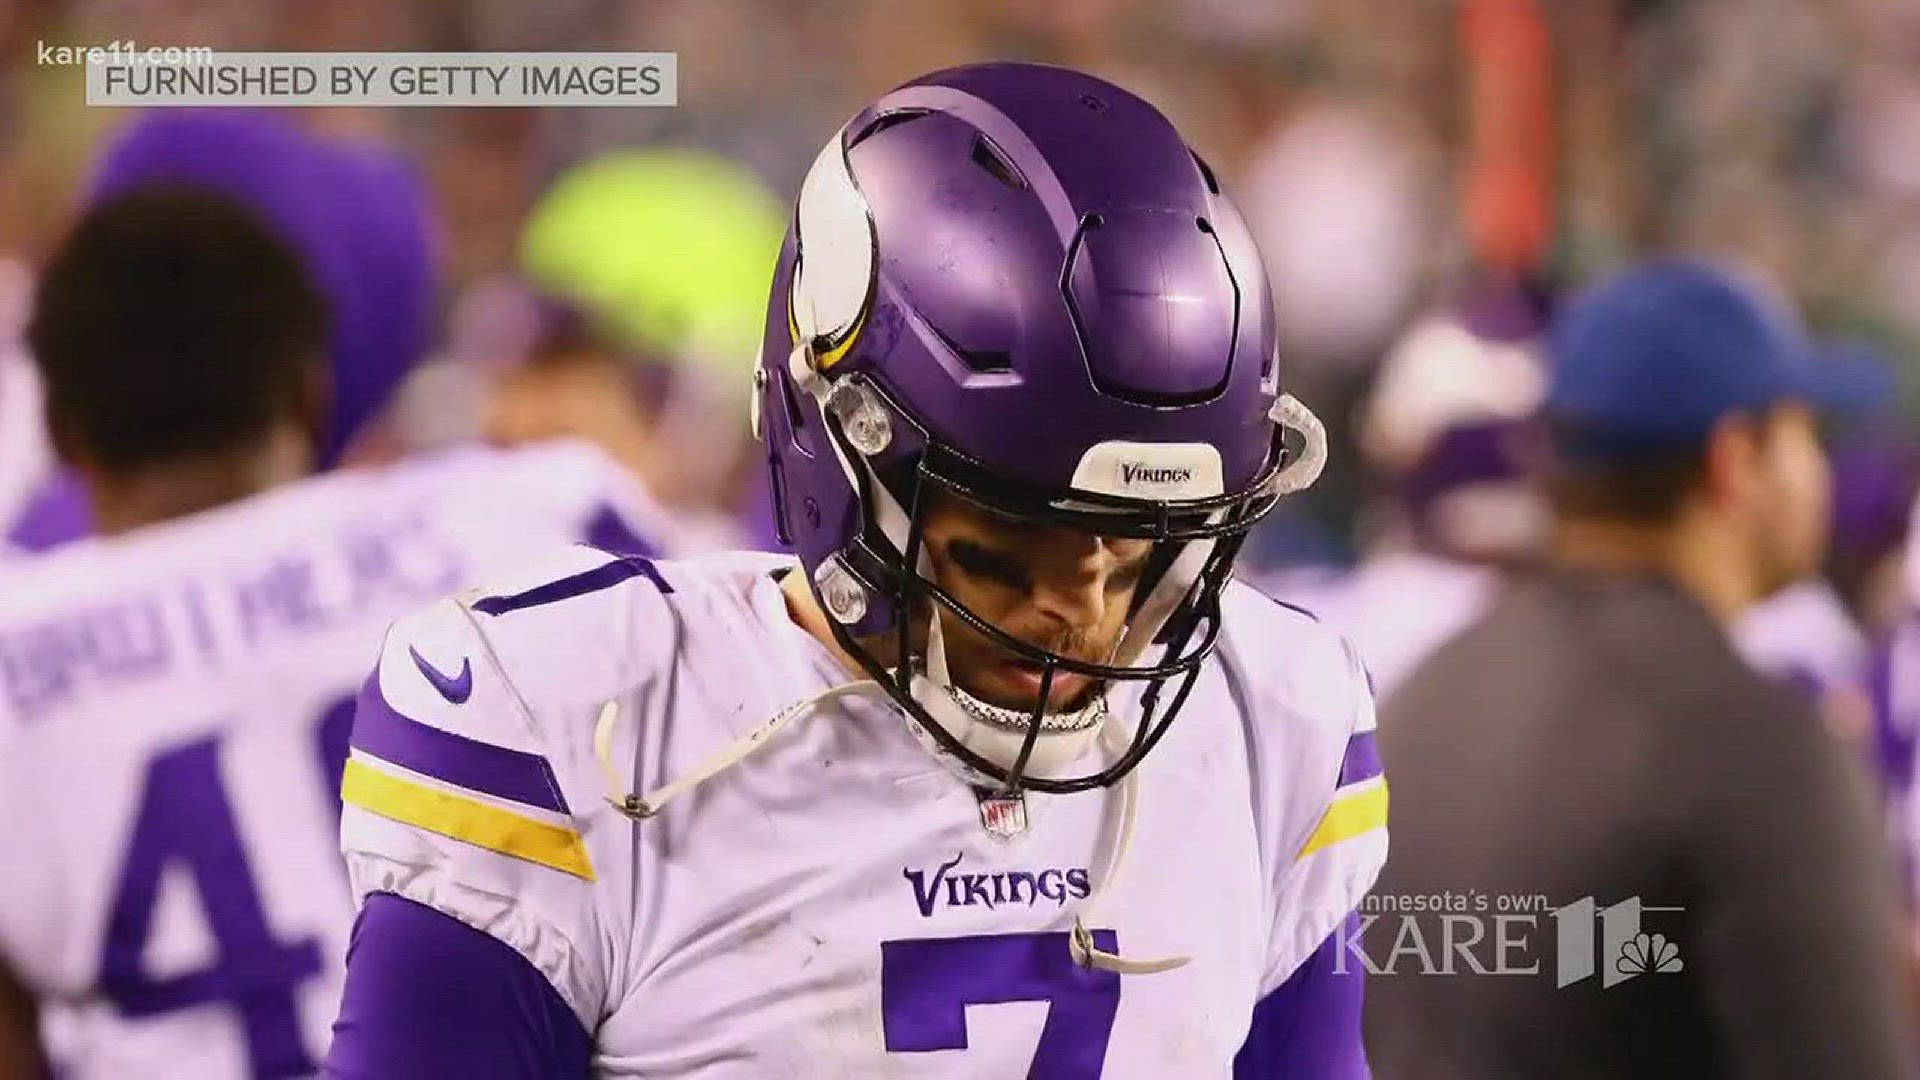 A lot of heartbroken Vikings fans are still in shock and just trying to get through the day. How do you deal with a team that keeps letting you down -- even after a great season?